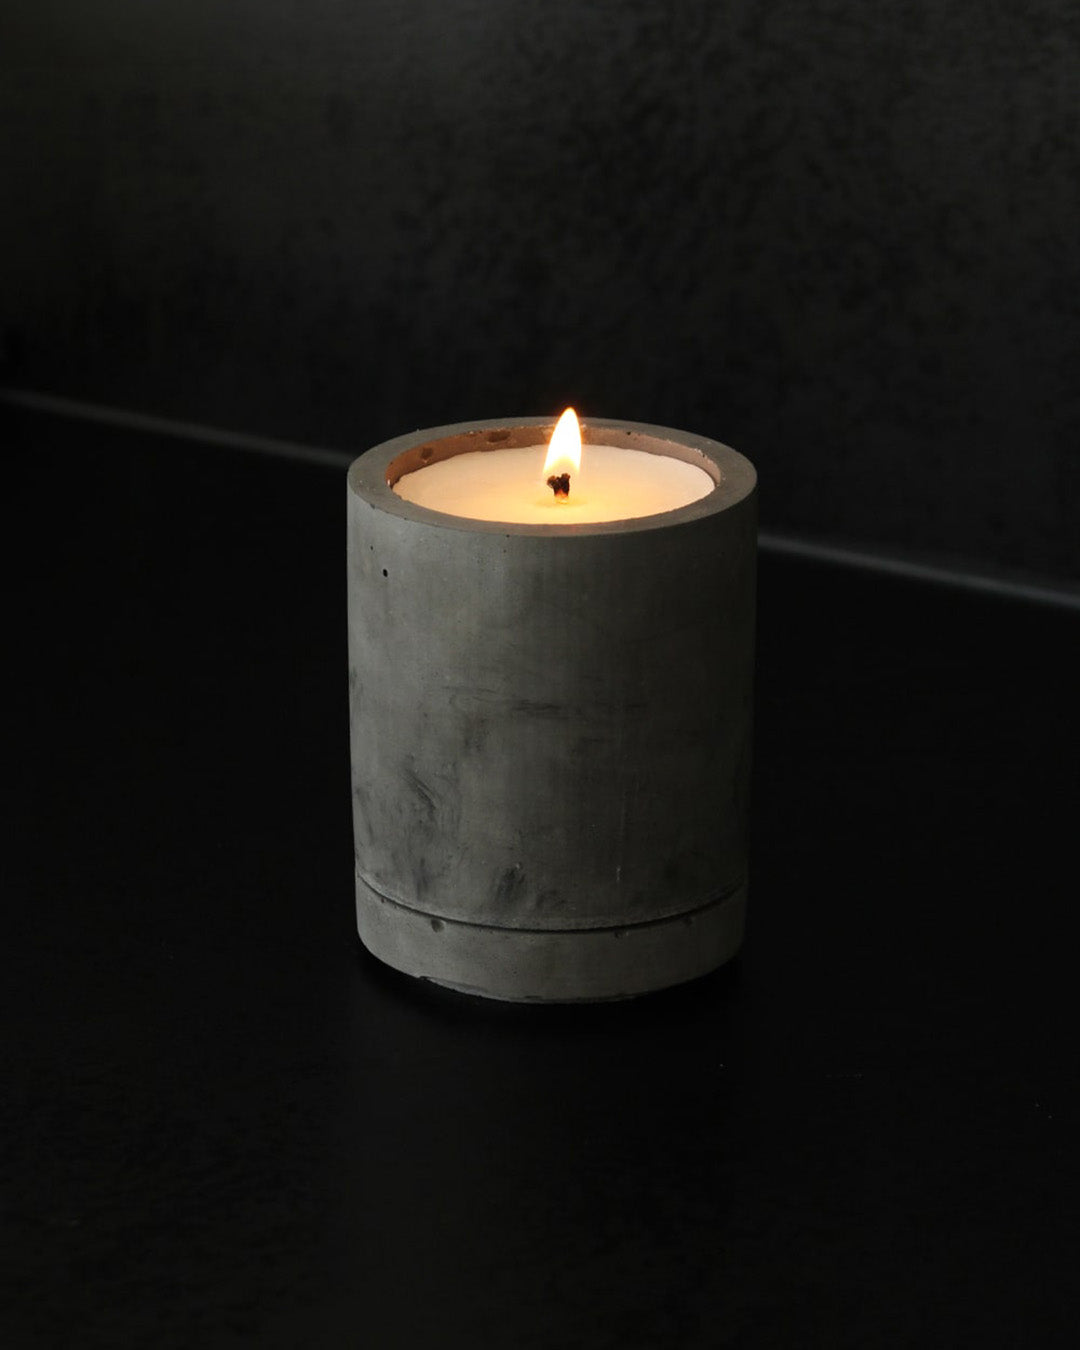 Scented Concrete Candle